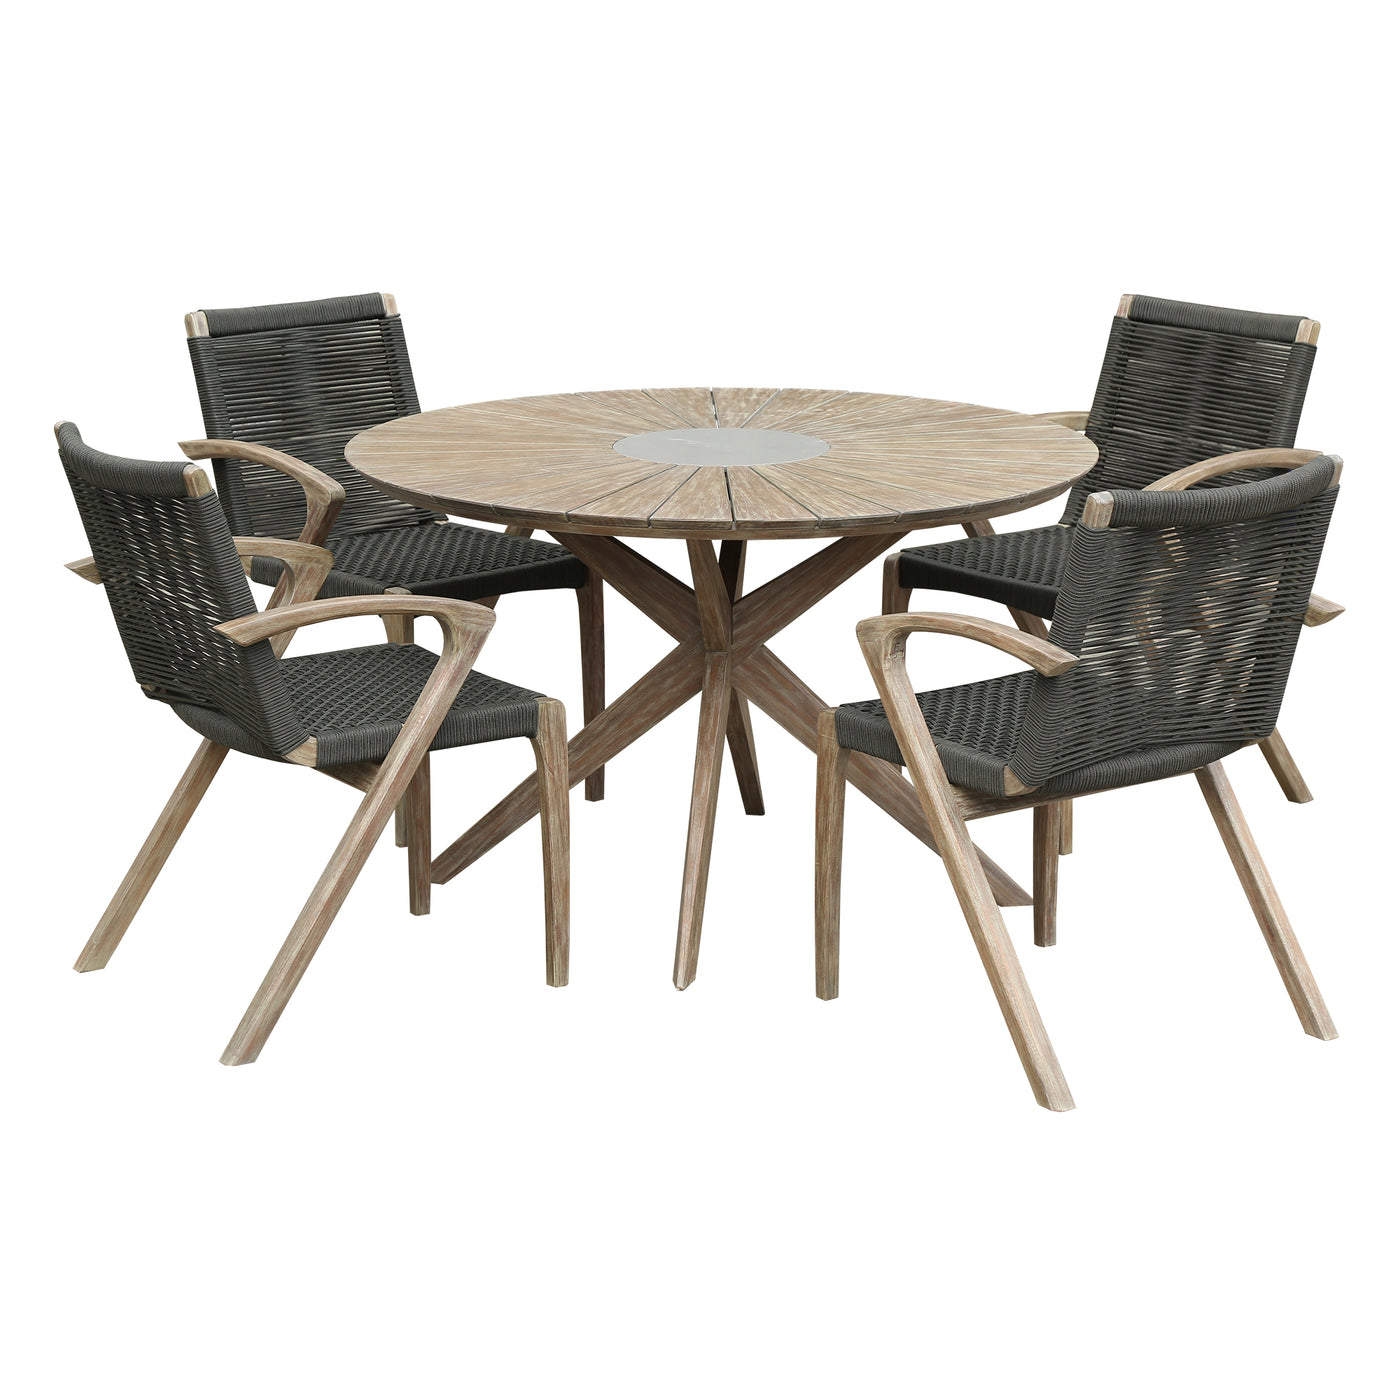 Oasis and Brielle Outdoor Dining Set